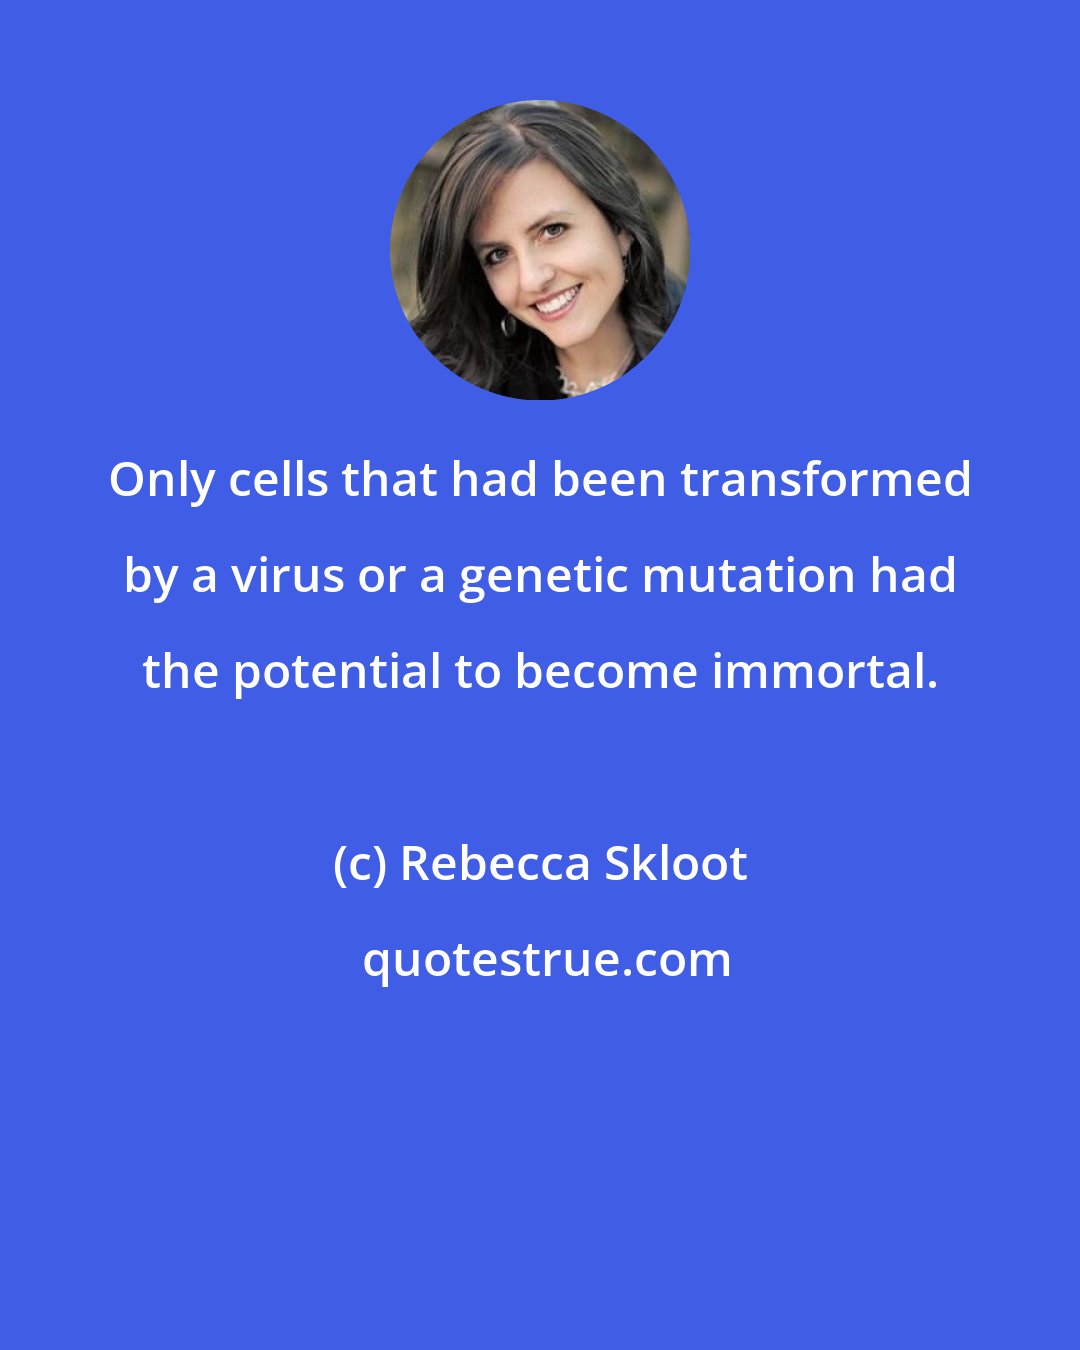 Rebecca Skloot: Only cells that had been transformed by a virus or a genetic mutation had the potential to become immortal.